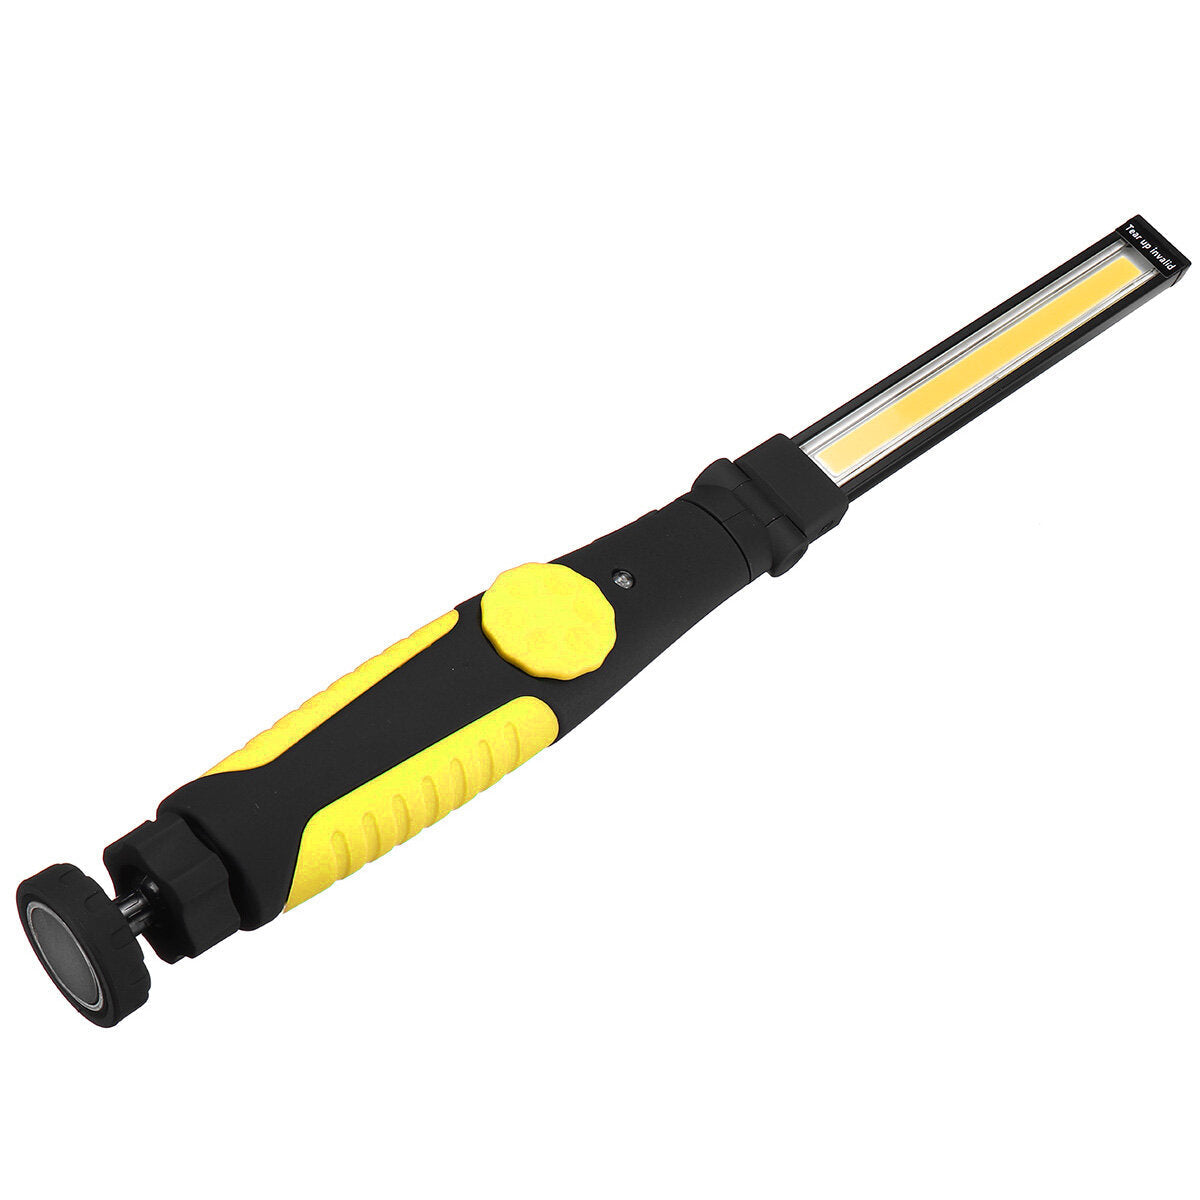 410 Lumens Multi-function COB LED Flashlight Folding Magnetic Attraction USB Rechargeable Working Light